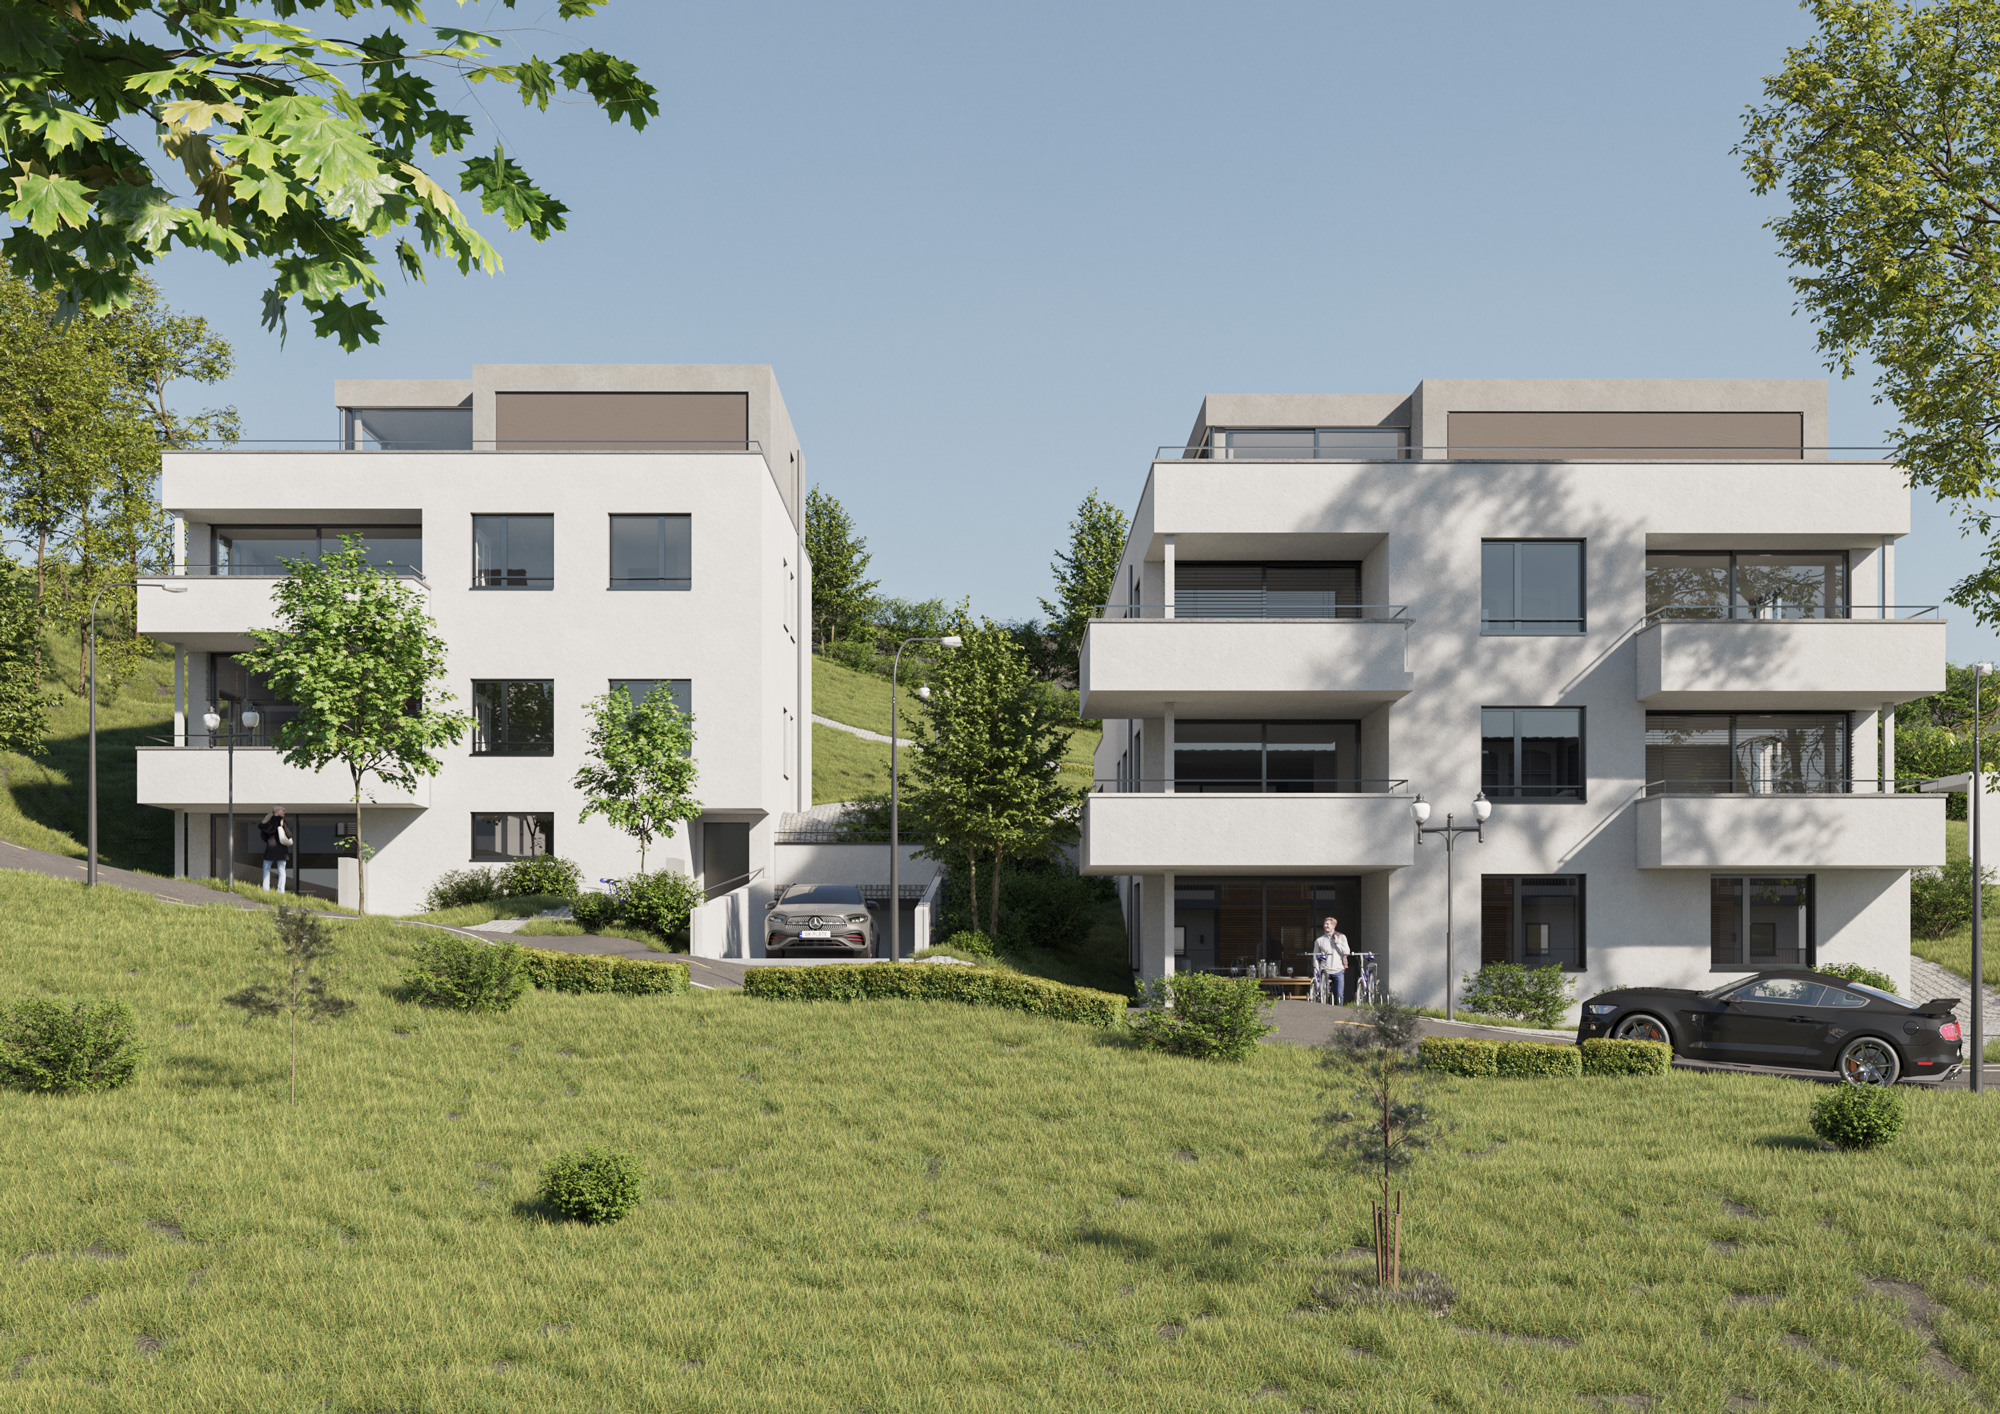 Exterior Architectural Visualization in Swiss